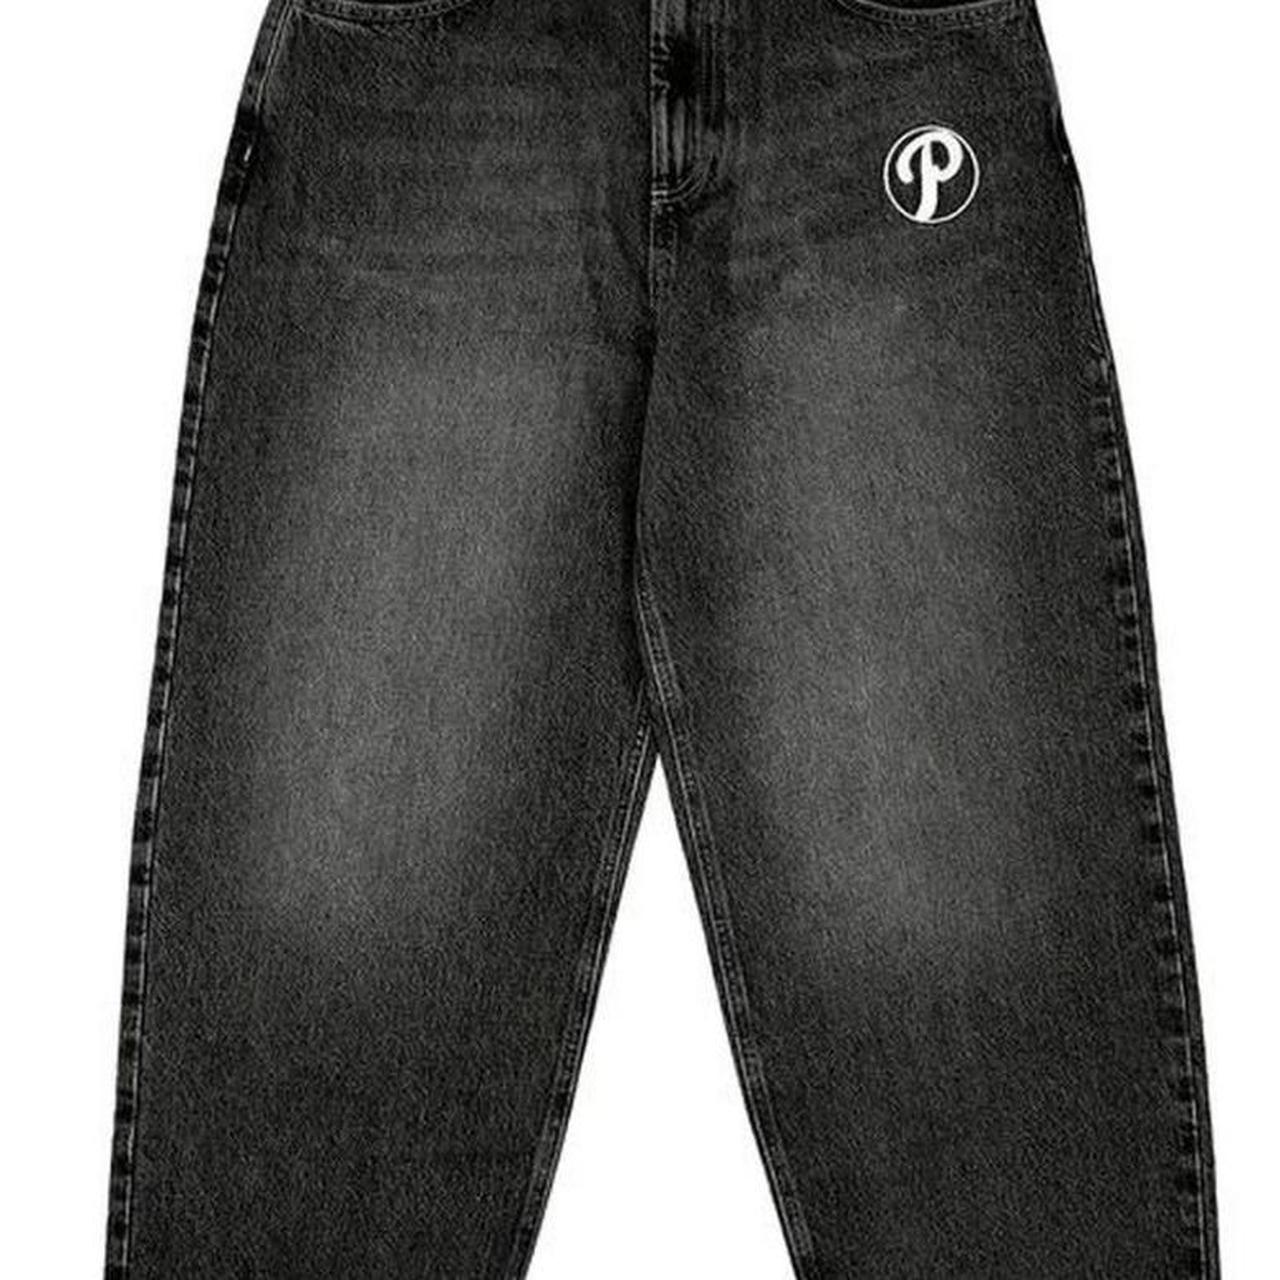 Protect London Jeans – F22 London